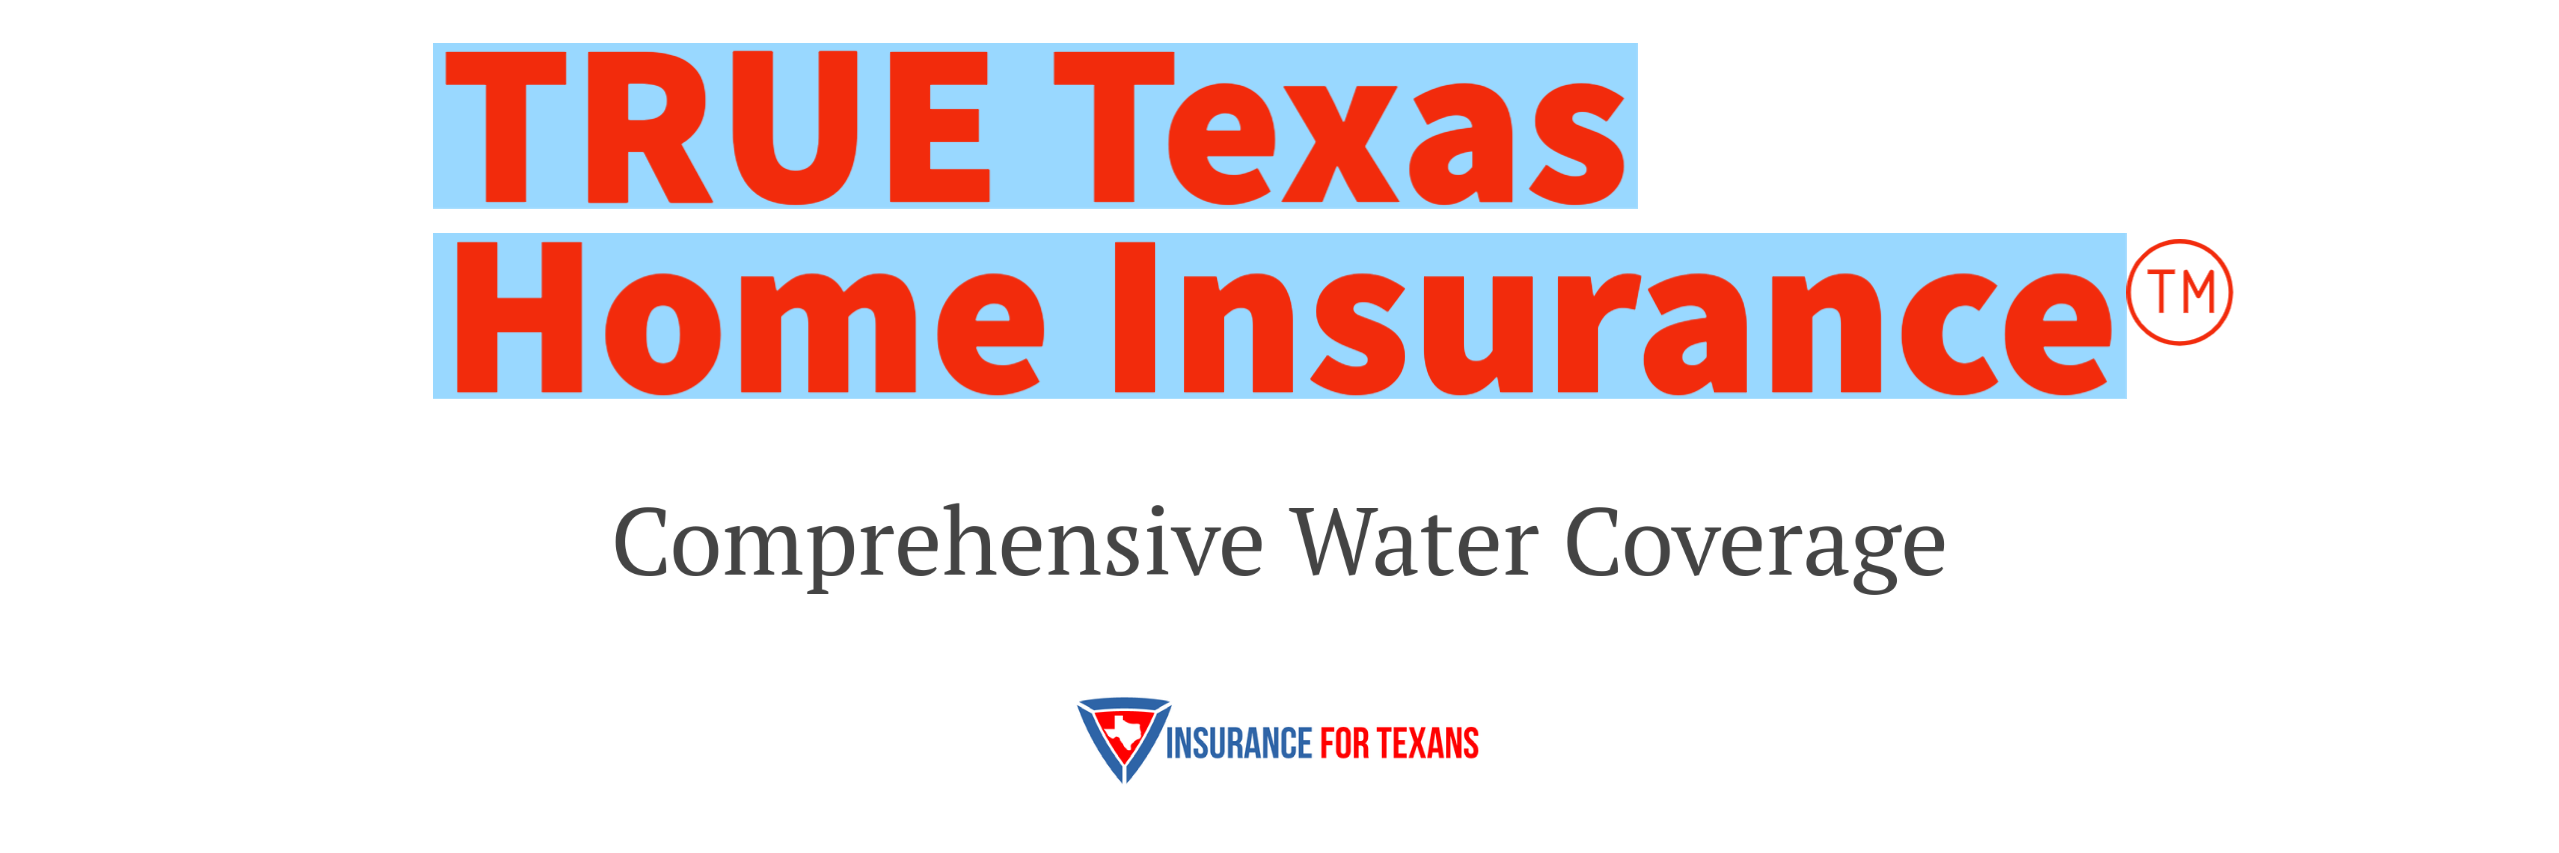 True Texas Home Insurance - Comprehensive Water Coverage